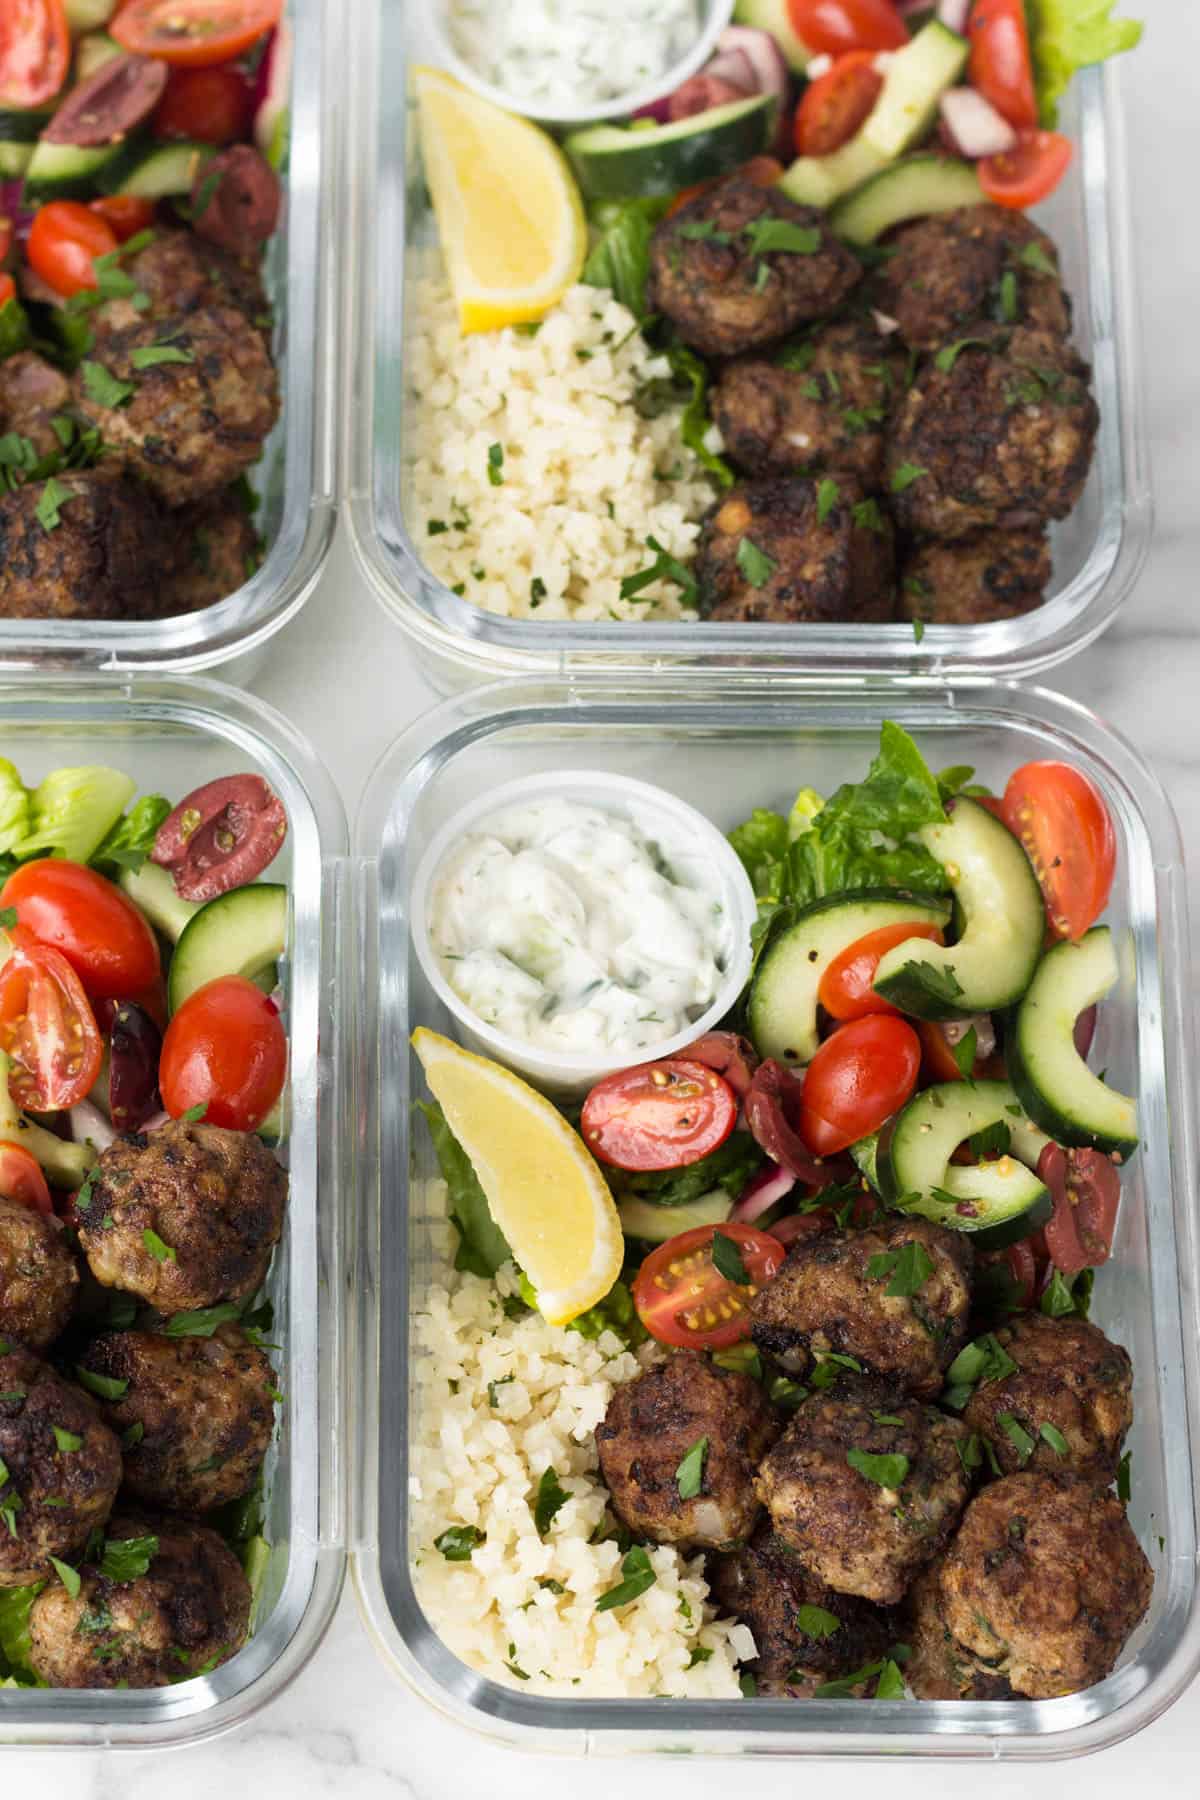 Greek lamb meatballs bowls with veggies and homemade sauce. Meal Prep Lunch Recipes